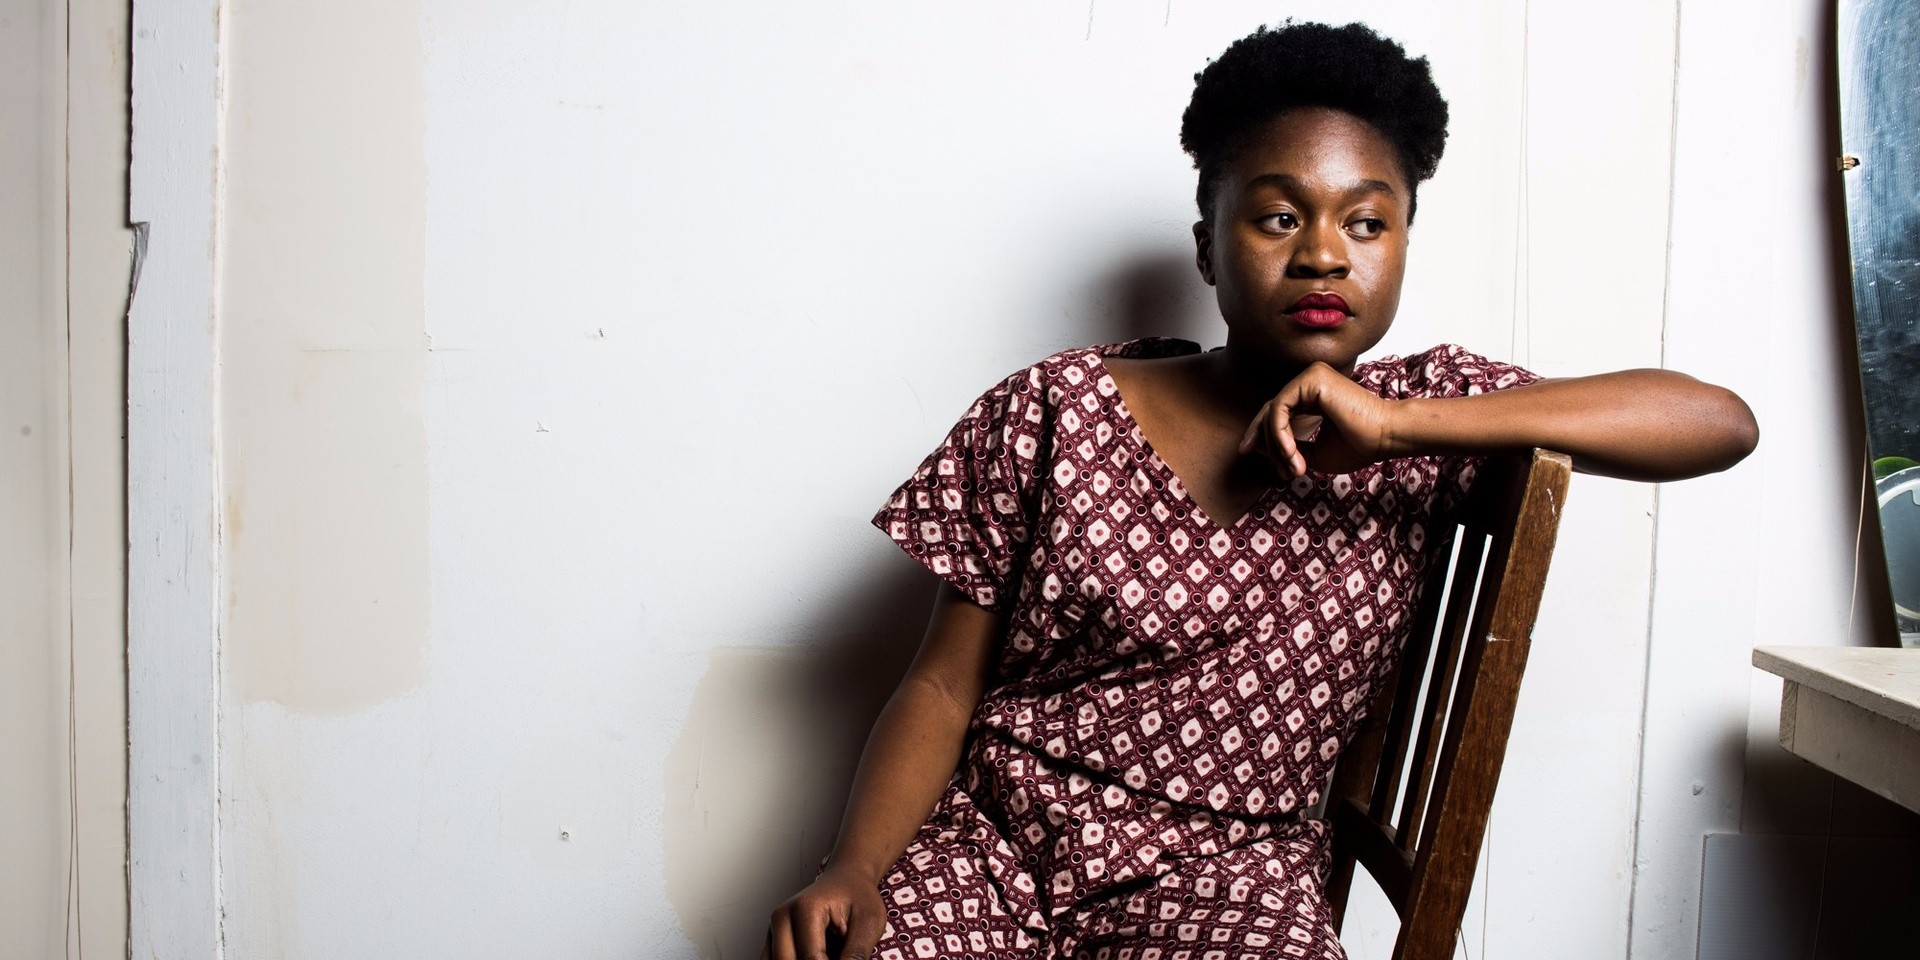 Zambian poet and rapper Sampa The Great is hip-hop's eloquent, soulful future